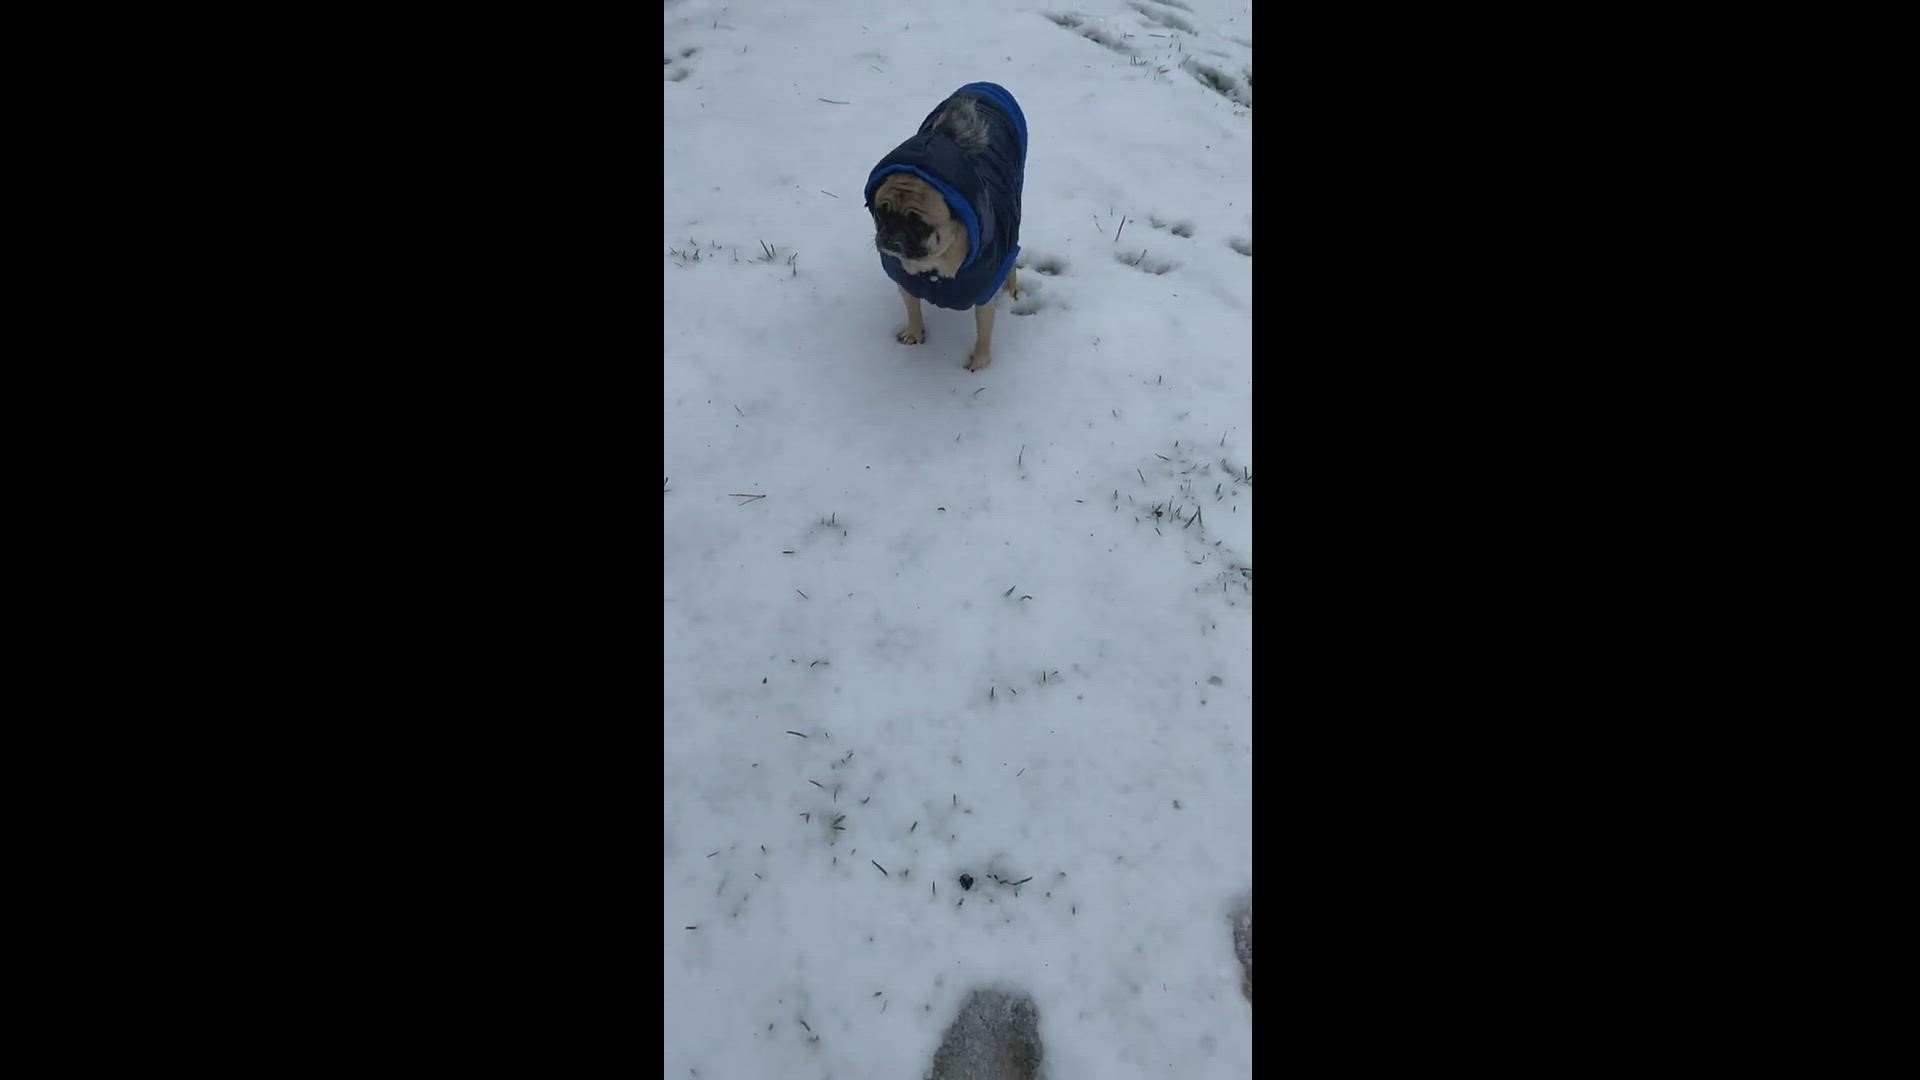 Frank in Lula, Ga enjoys his first time in the snow on Jan. 16, 2022.
Credit: Jaycie Bowen